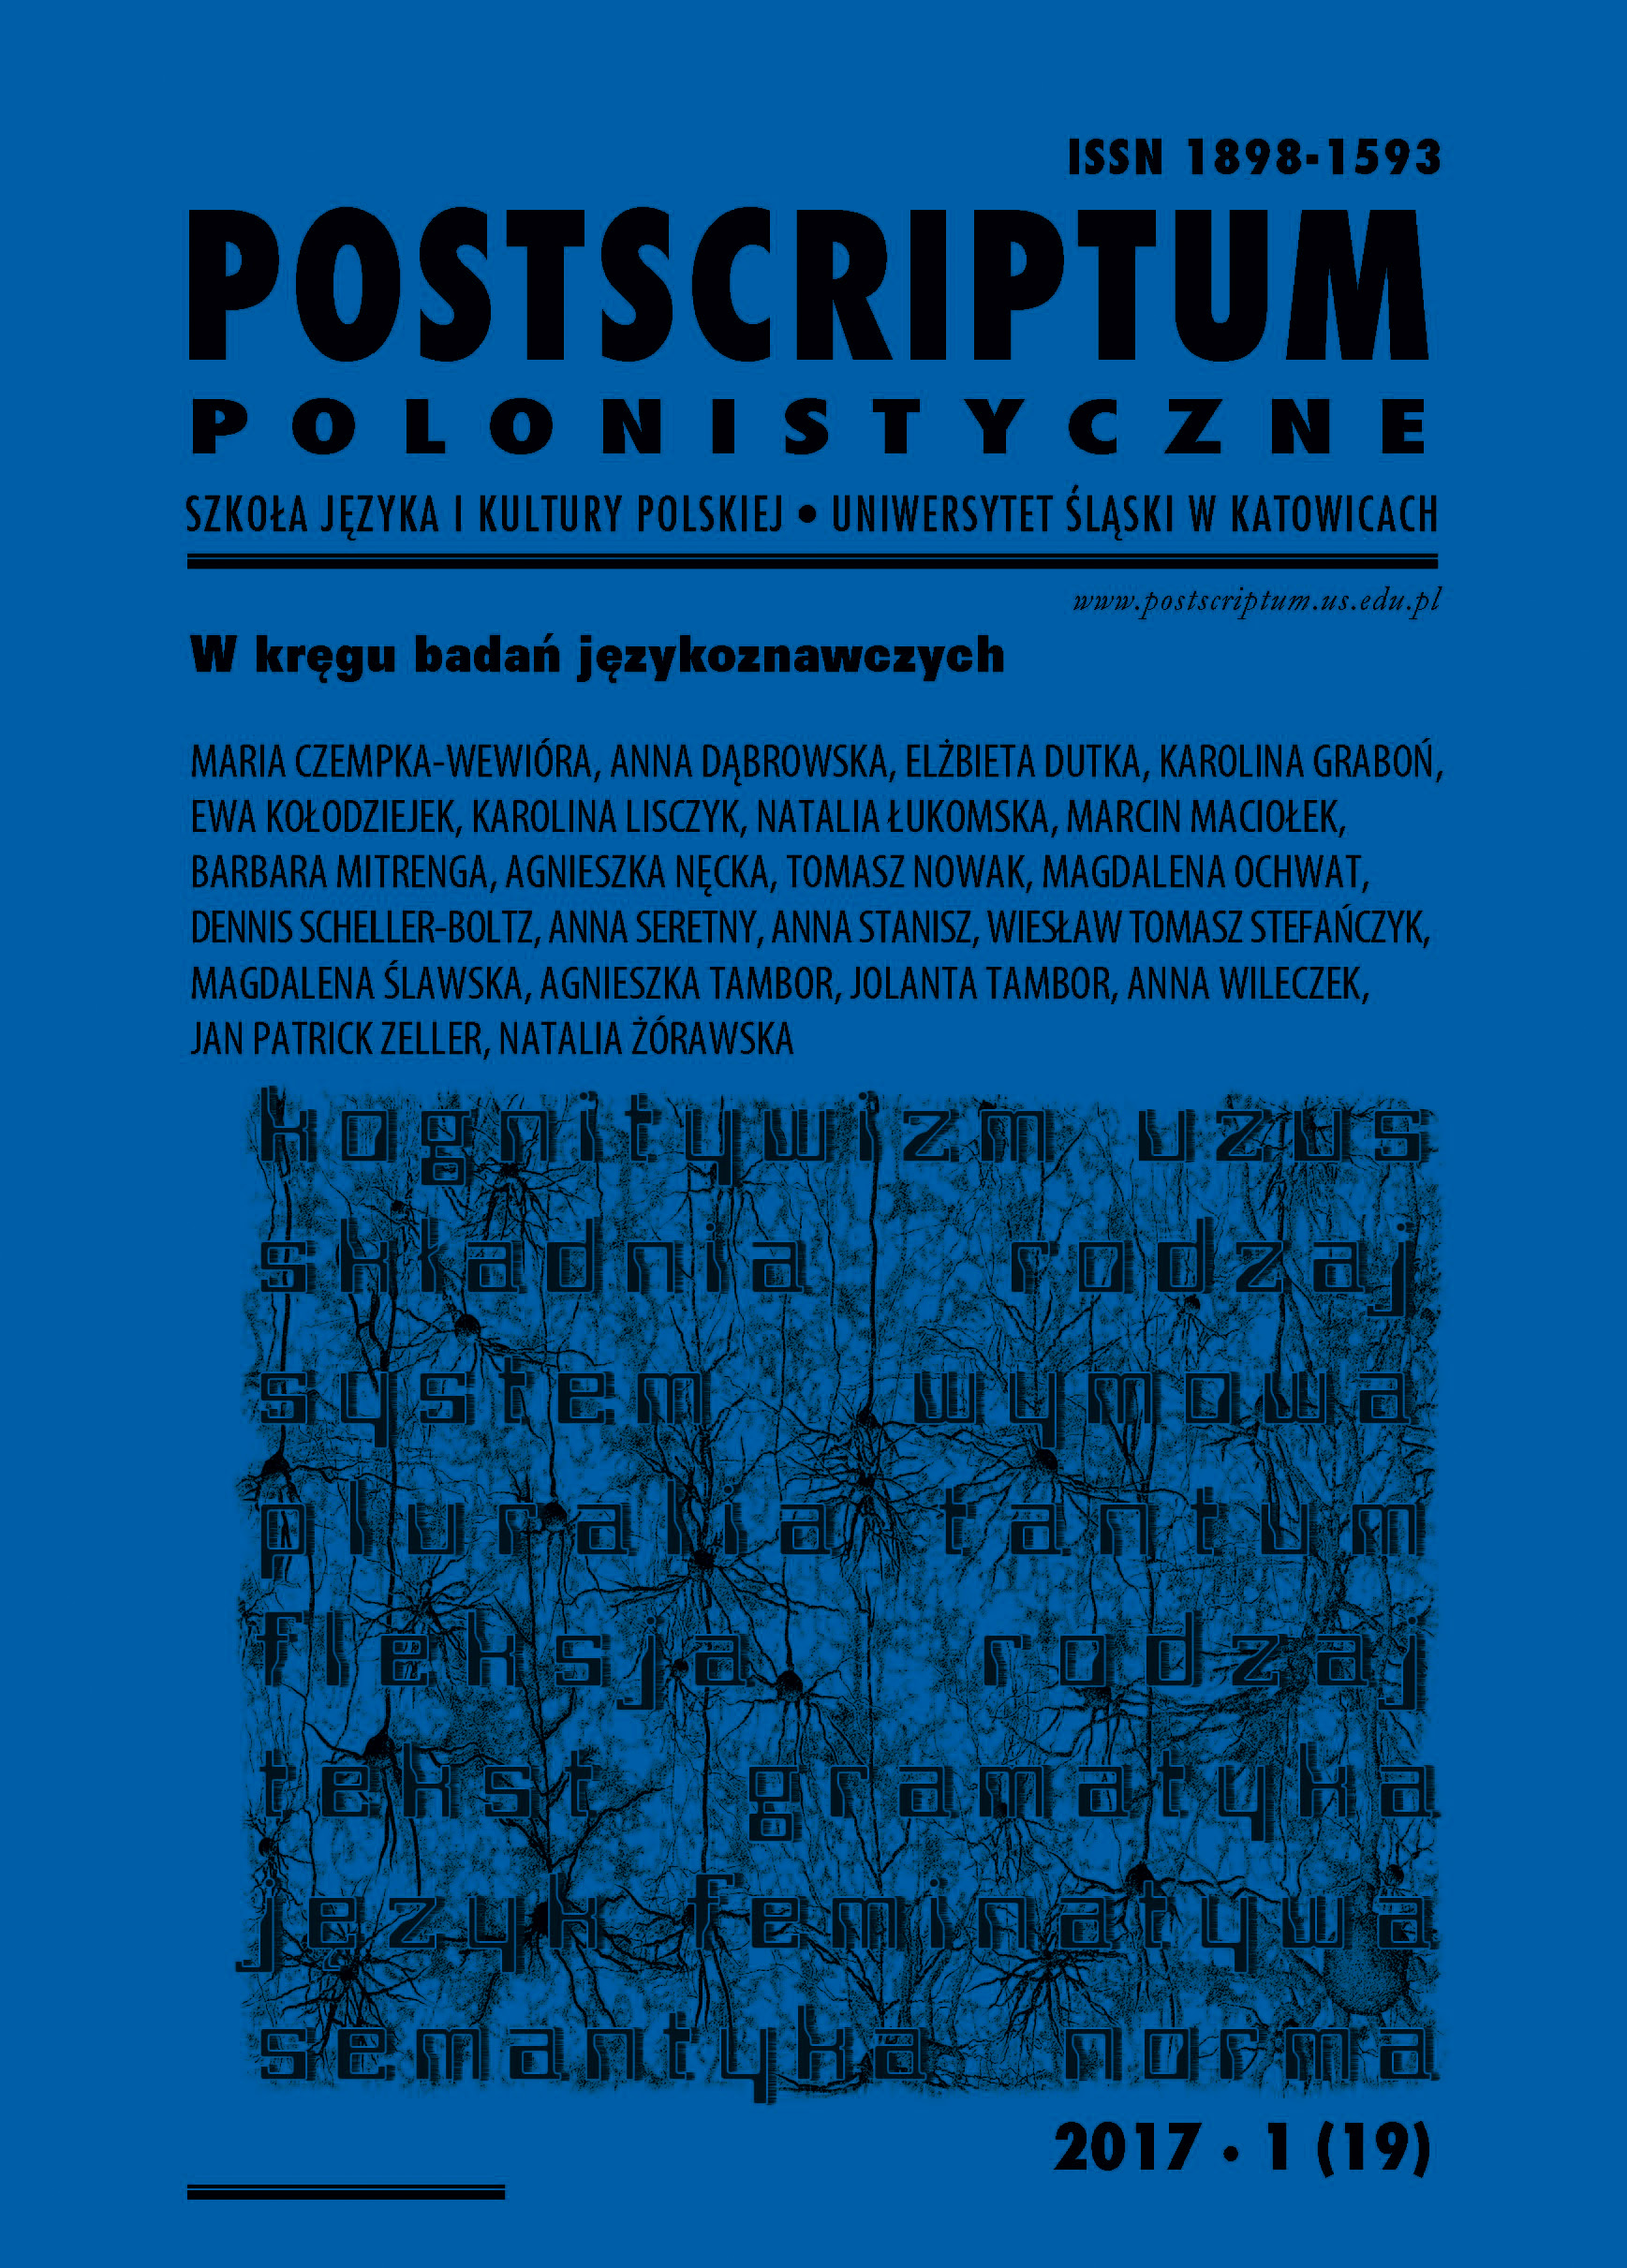 Postmemory discourse in literature for children and teenagers. Review of Małgorzata Wójcik-Dudek's book Cover Image